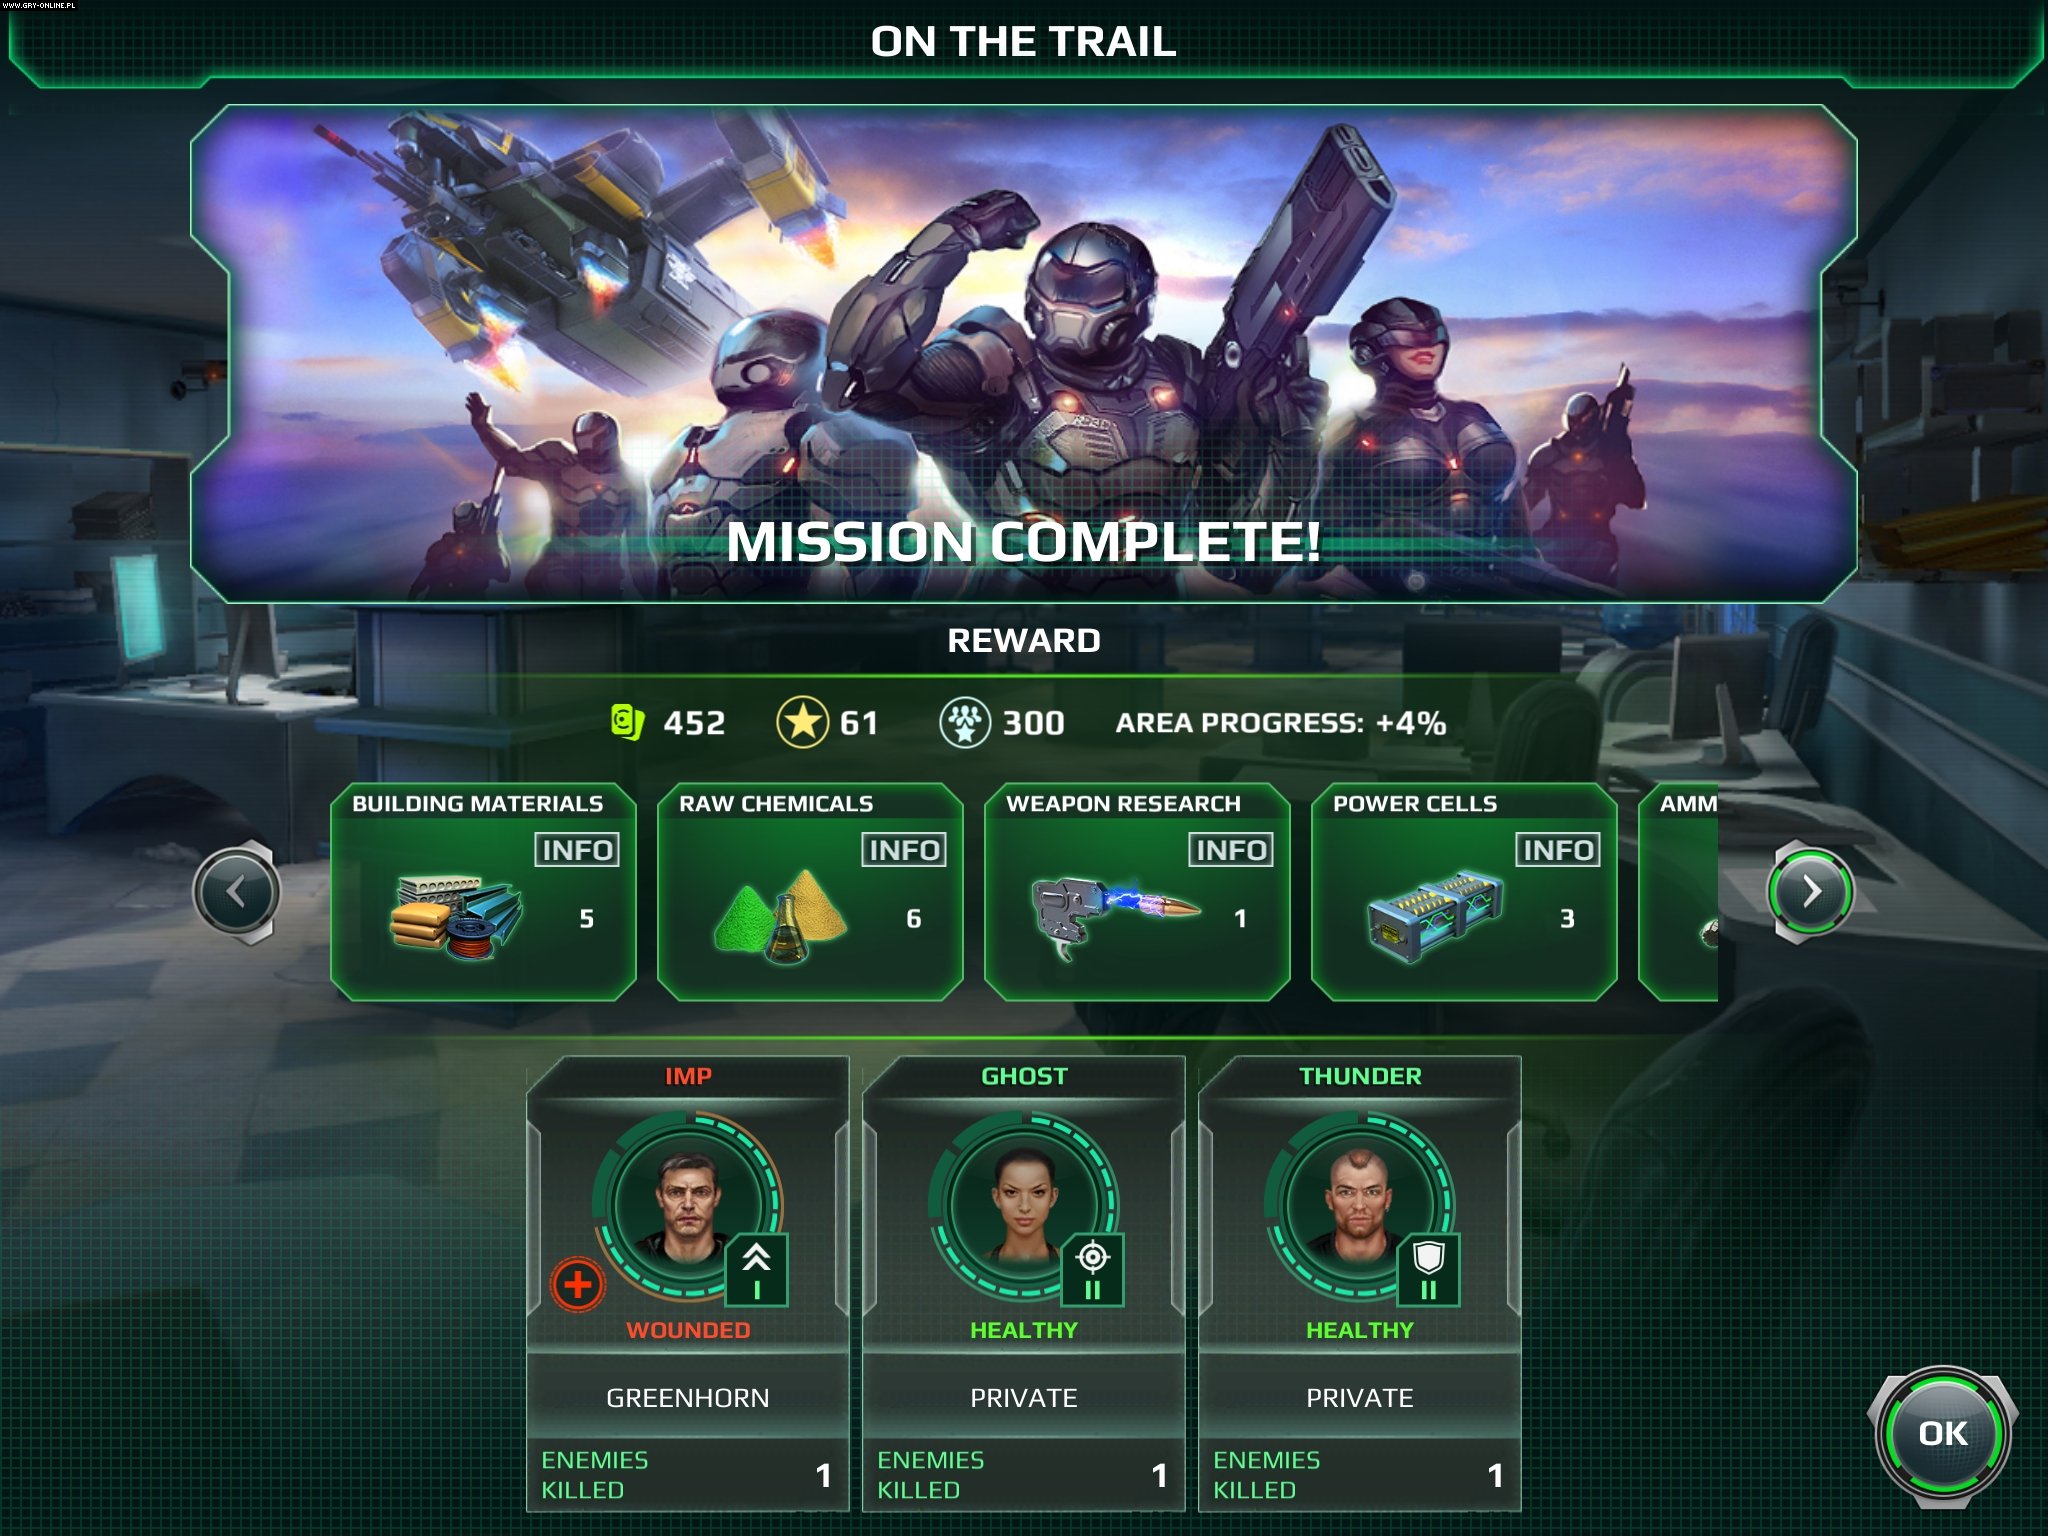 Complete the mission to obtain 15. Mission completed игра. Level complete UI. Game UI Mission. Интерфейсы игр брифинг.